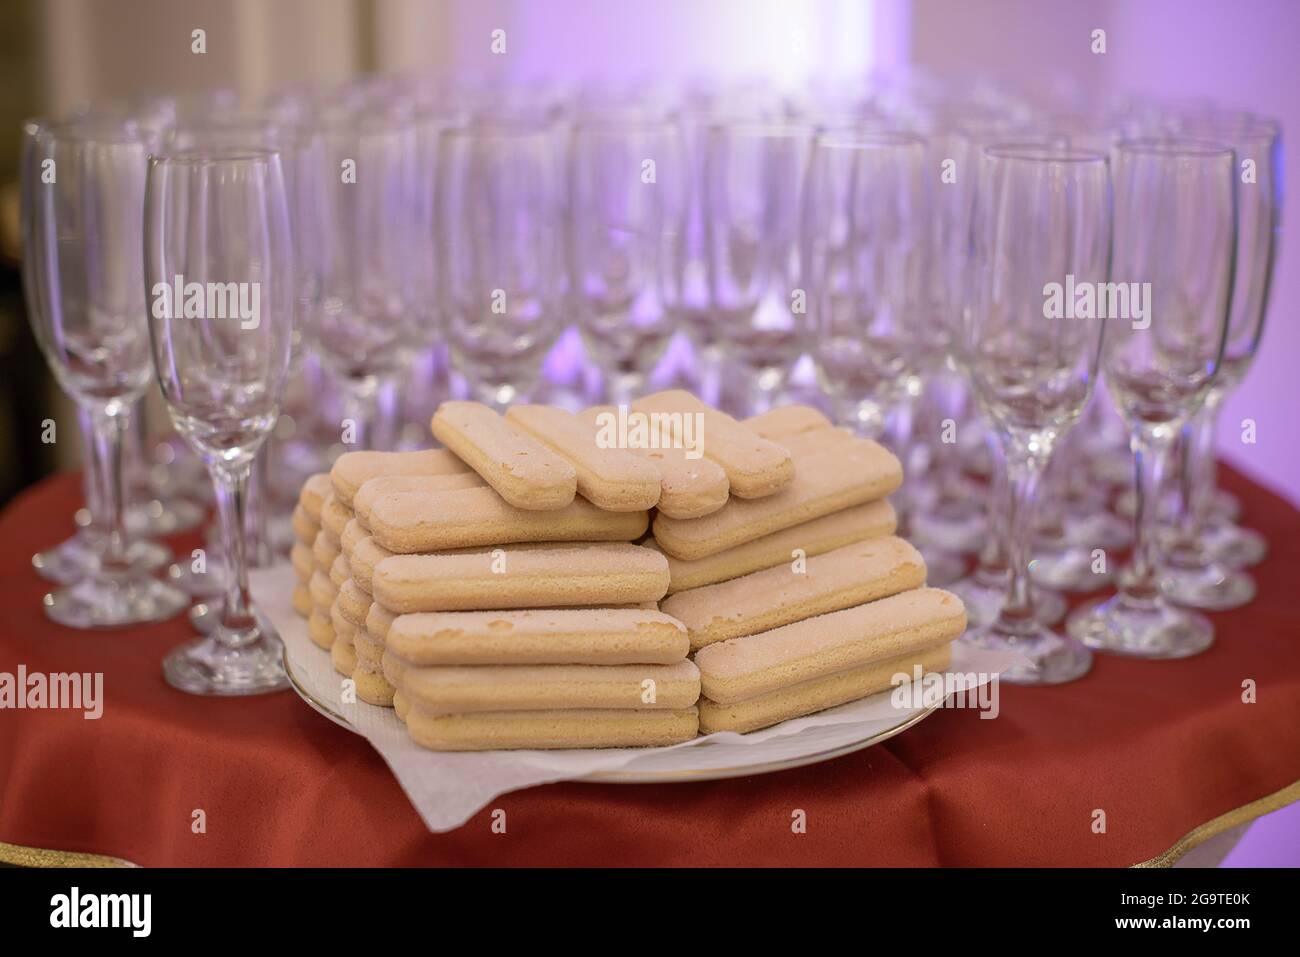 Event or wedding reception table arrangement featuring empty flutes for champagne or bubbly drinks and ladyfinger sponge biscuits, prepared for guests Stock Photo